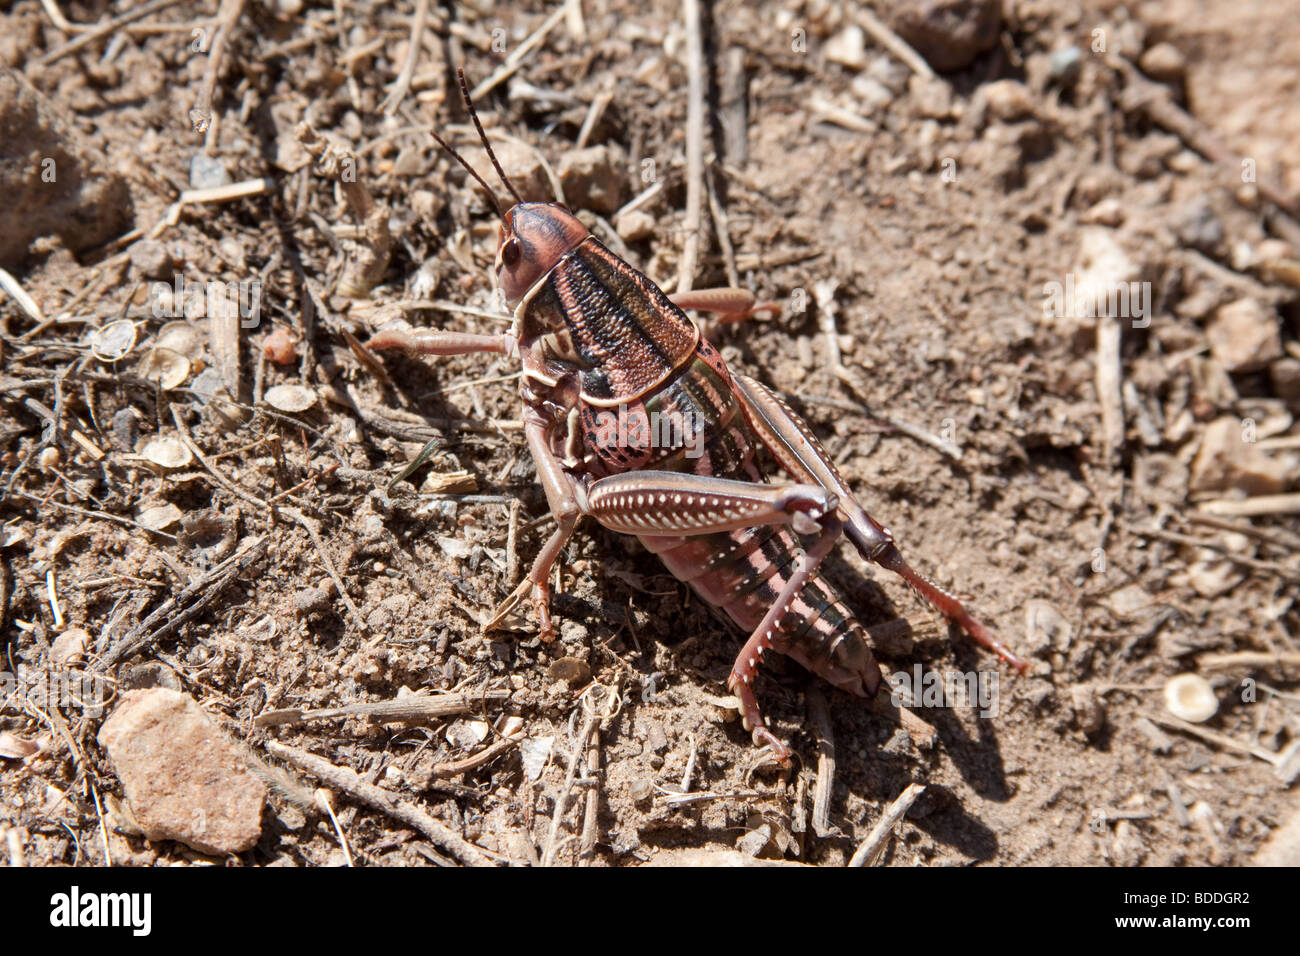 A desert locust found at about 5800 feet in elevation in the high desert plains of Colorado Stock Photo